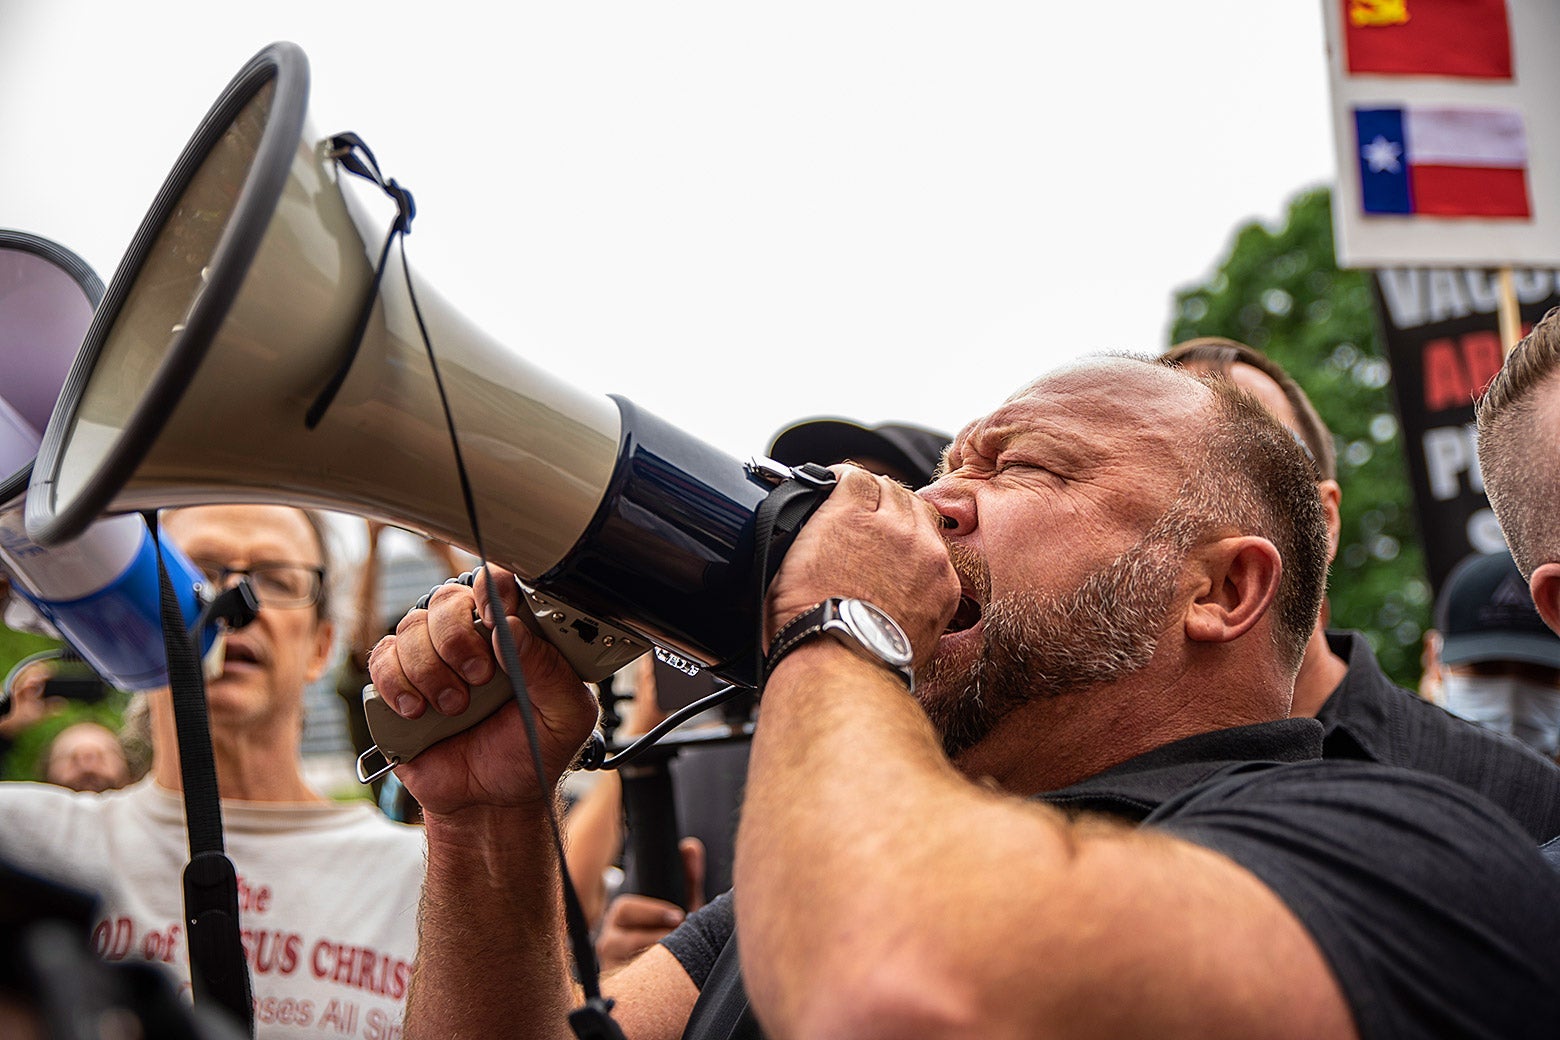 Alex Jones, in the middle of a crowd, roars into a bullhorn.